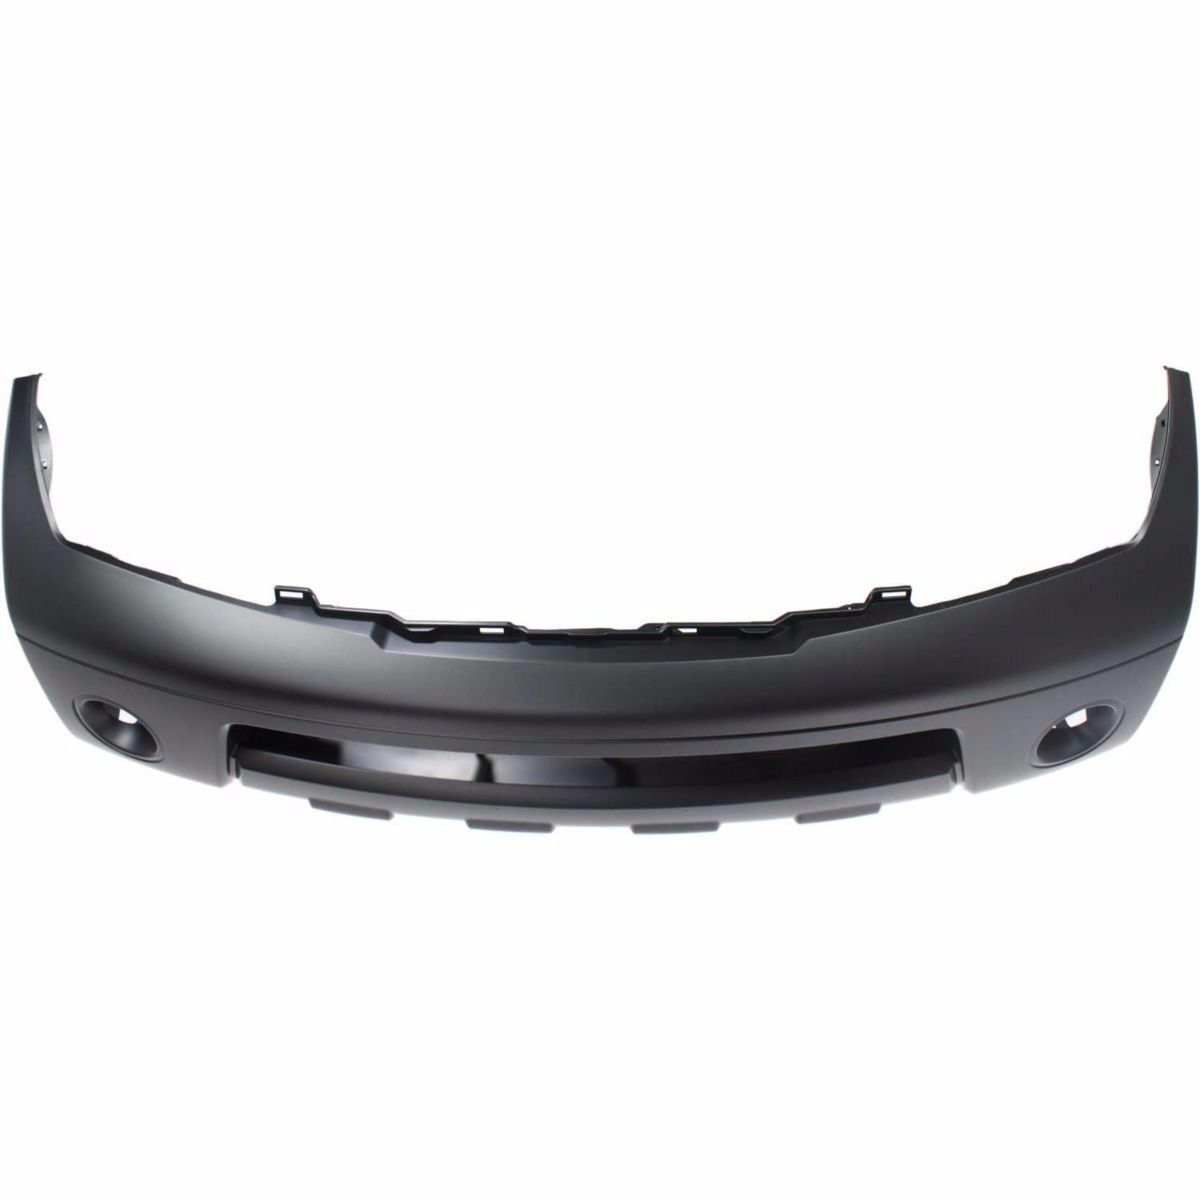 2005-2007 NISSAN PATHFINDER Front Bumper Cover Painted to Match